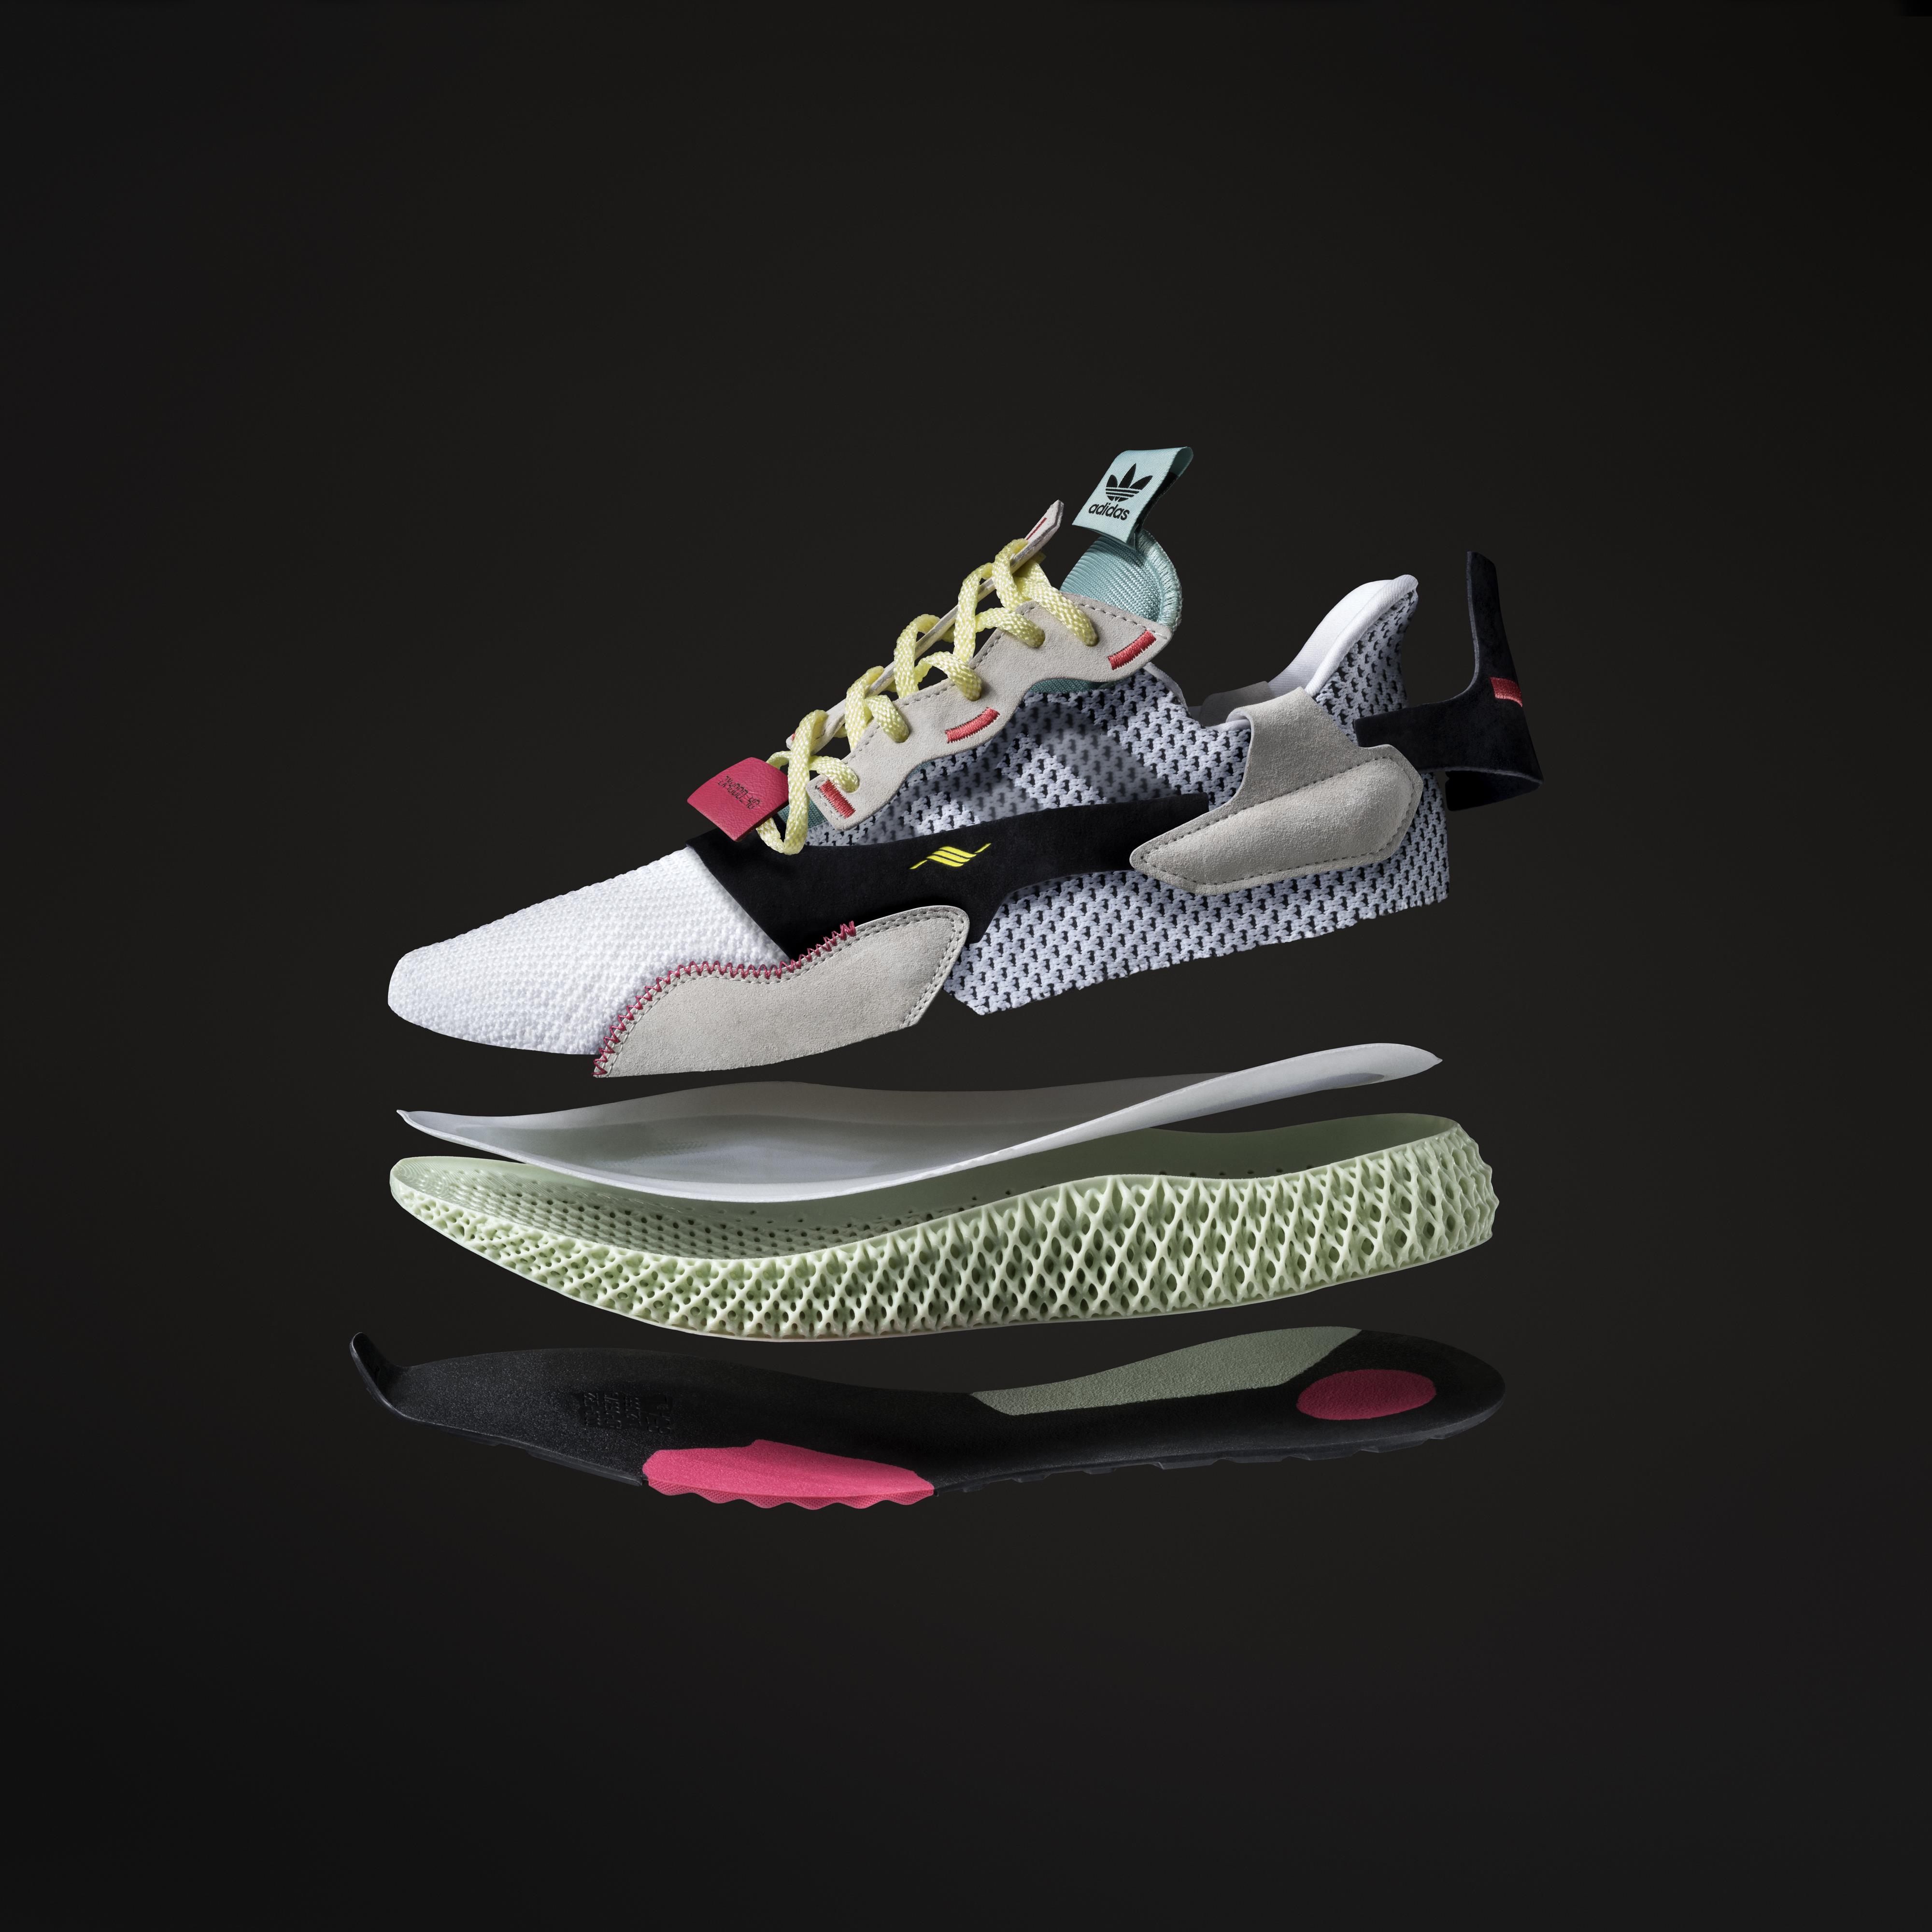 The ZX 4000 4D shoes featuring a Carbon 3D printed midsole. Image via Adidas.